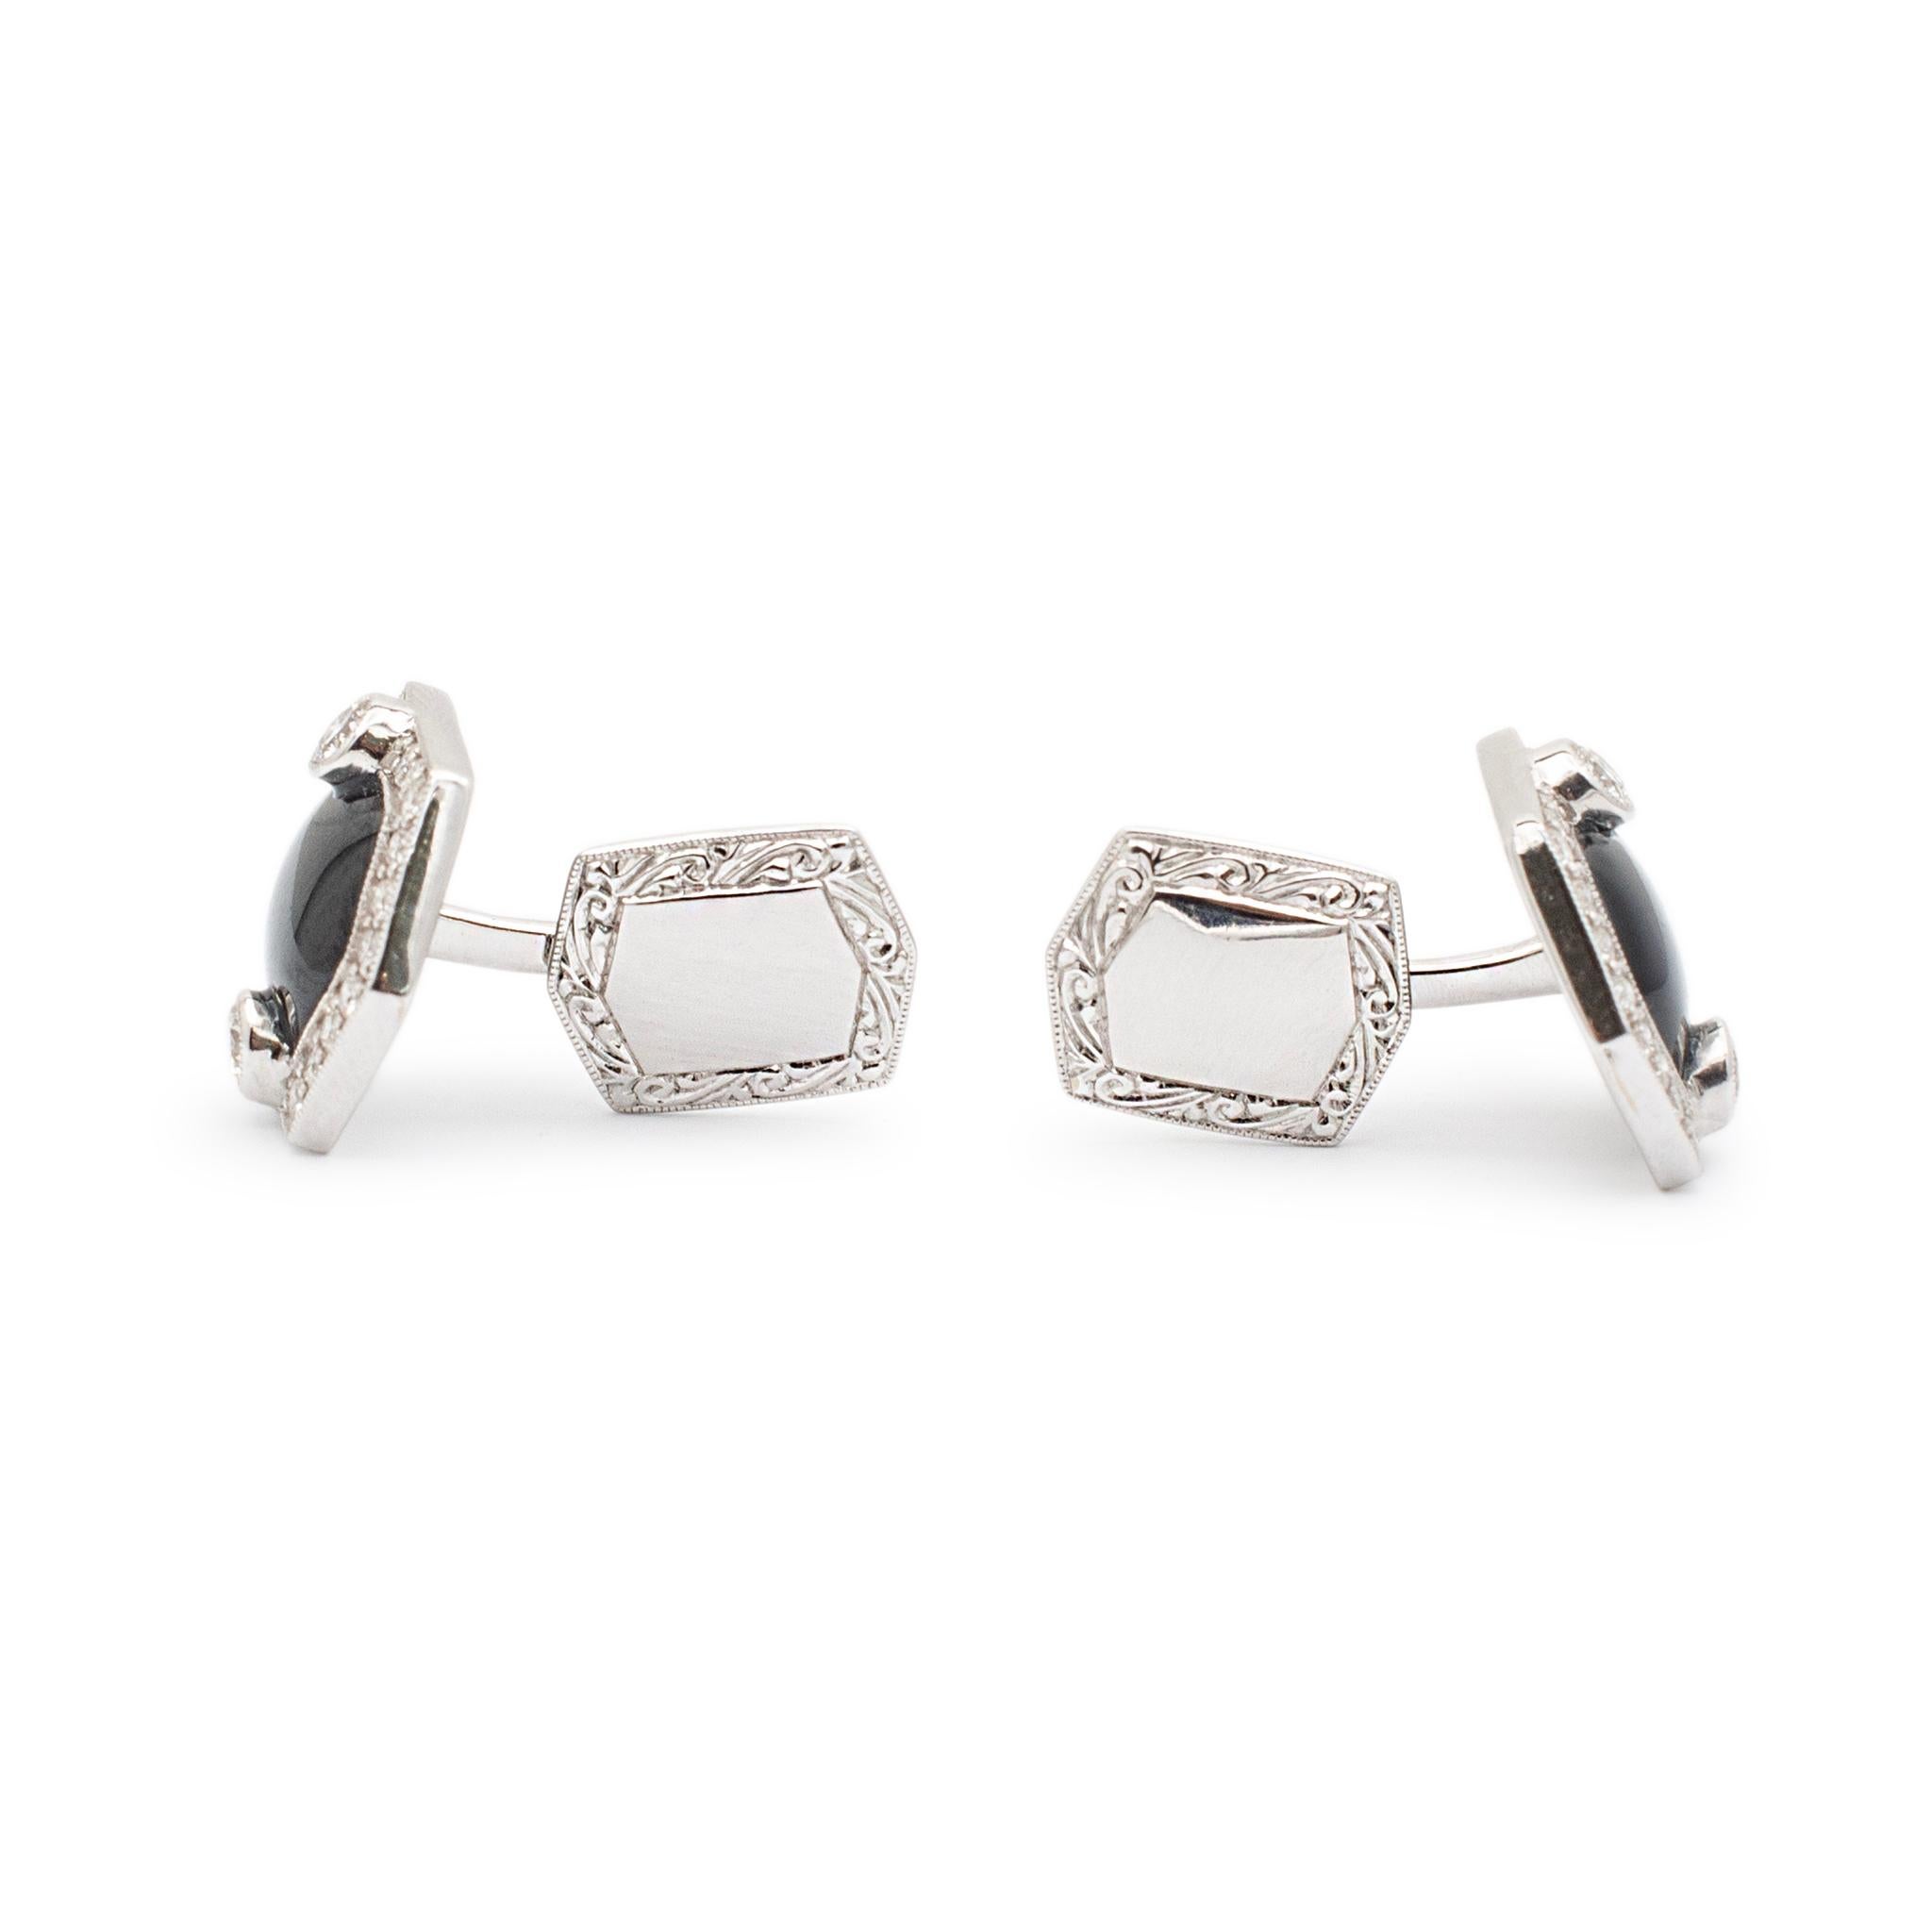 Gender: Unisex

Metal Type: 18K White Gold

Length: 0.75 mm

Width: 18.45 mm

Weight: 12.90 grams

One pair 18K white gold diamond and onyx cufflinks.  Engraved with 